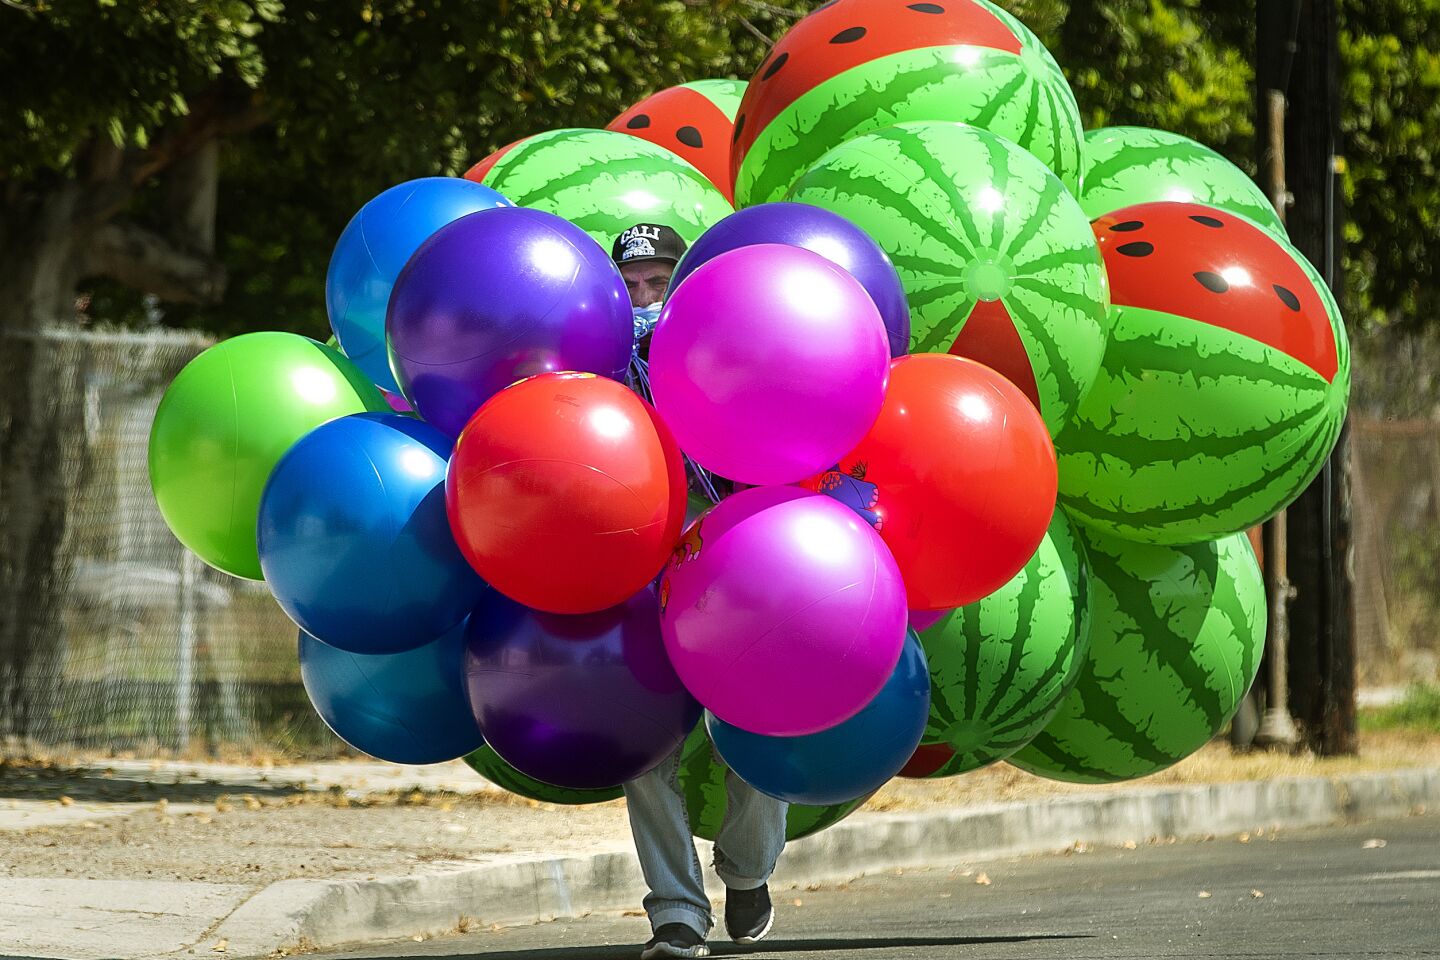 Carlos Gutierrez creates his own shade while walking with inflatable balls for sale in Pacoima.